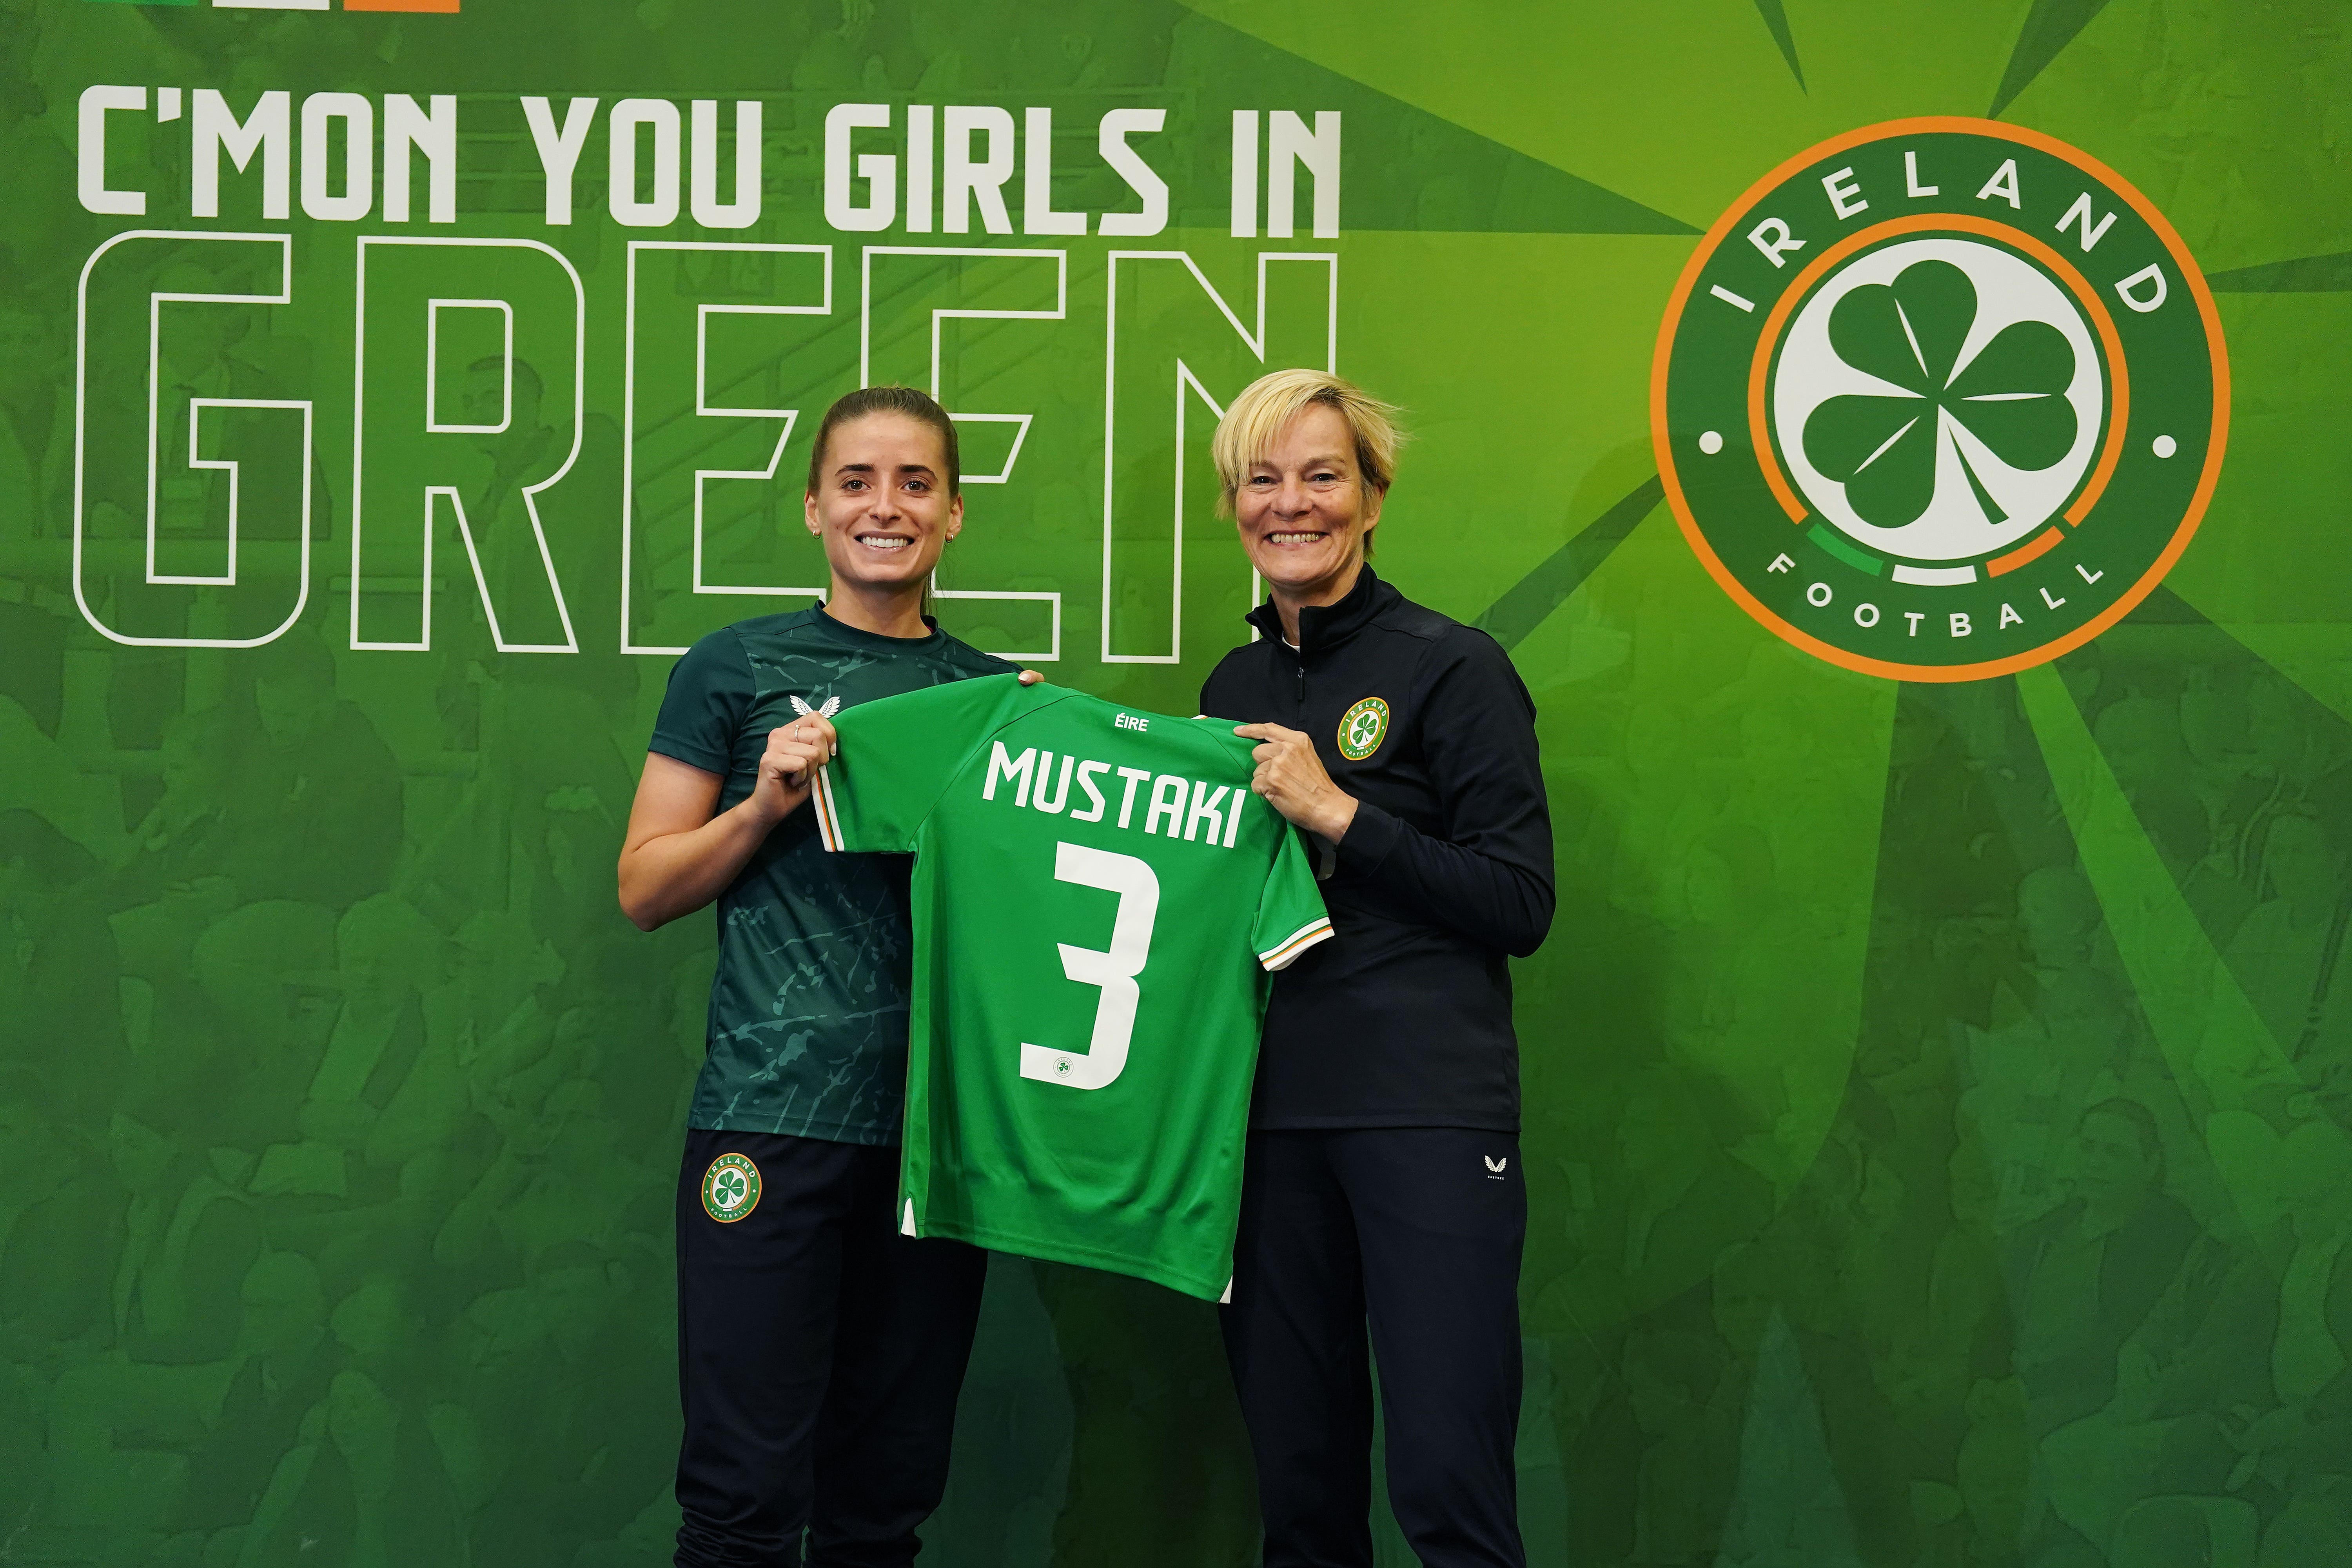 Republic of Ireland’s Chloe Mustaki, left, cannot wait for the World Cup (Brian Lawless/PA)